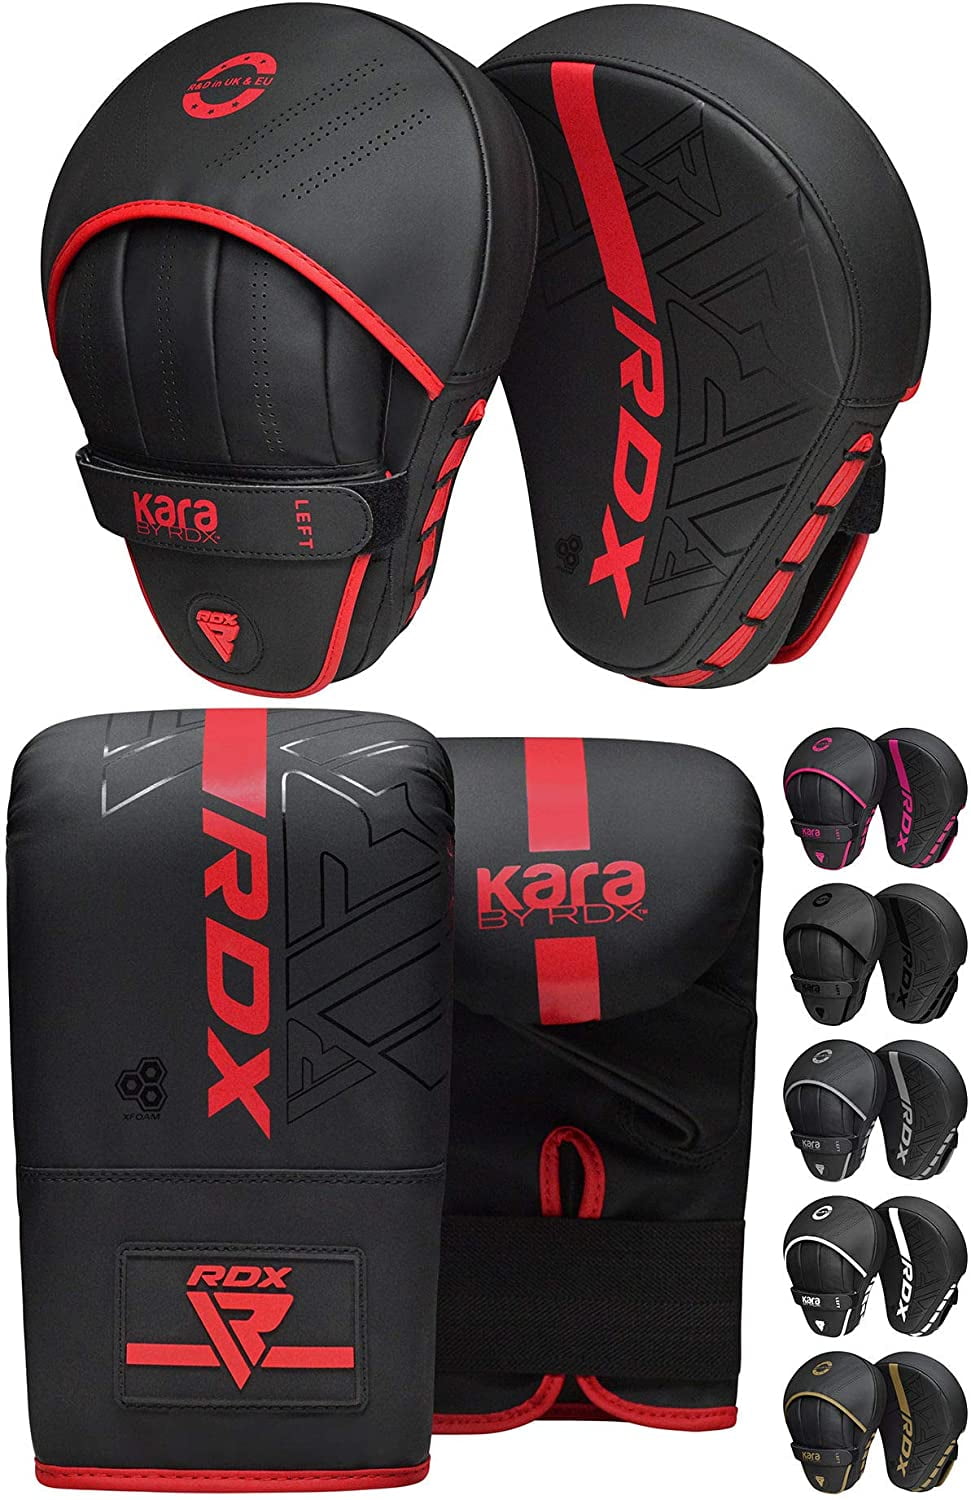 VELO Focus Pads Curved Mitts Hook and Jab Punch Bag Kick Boxing Muay Thai MMA 